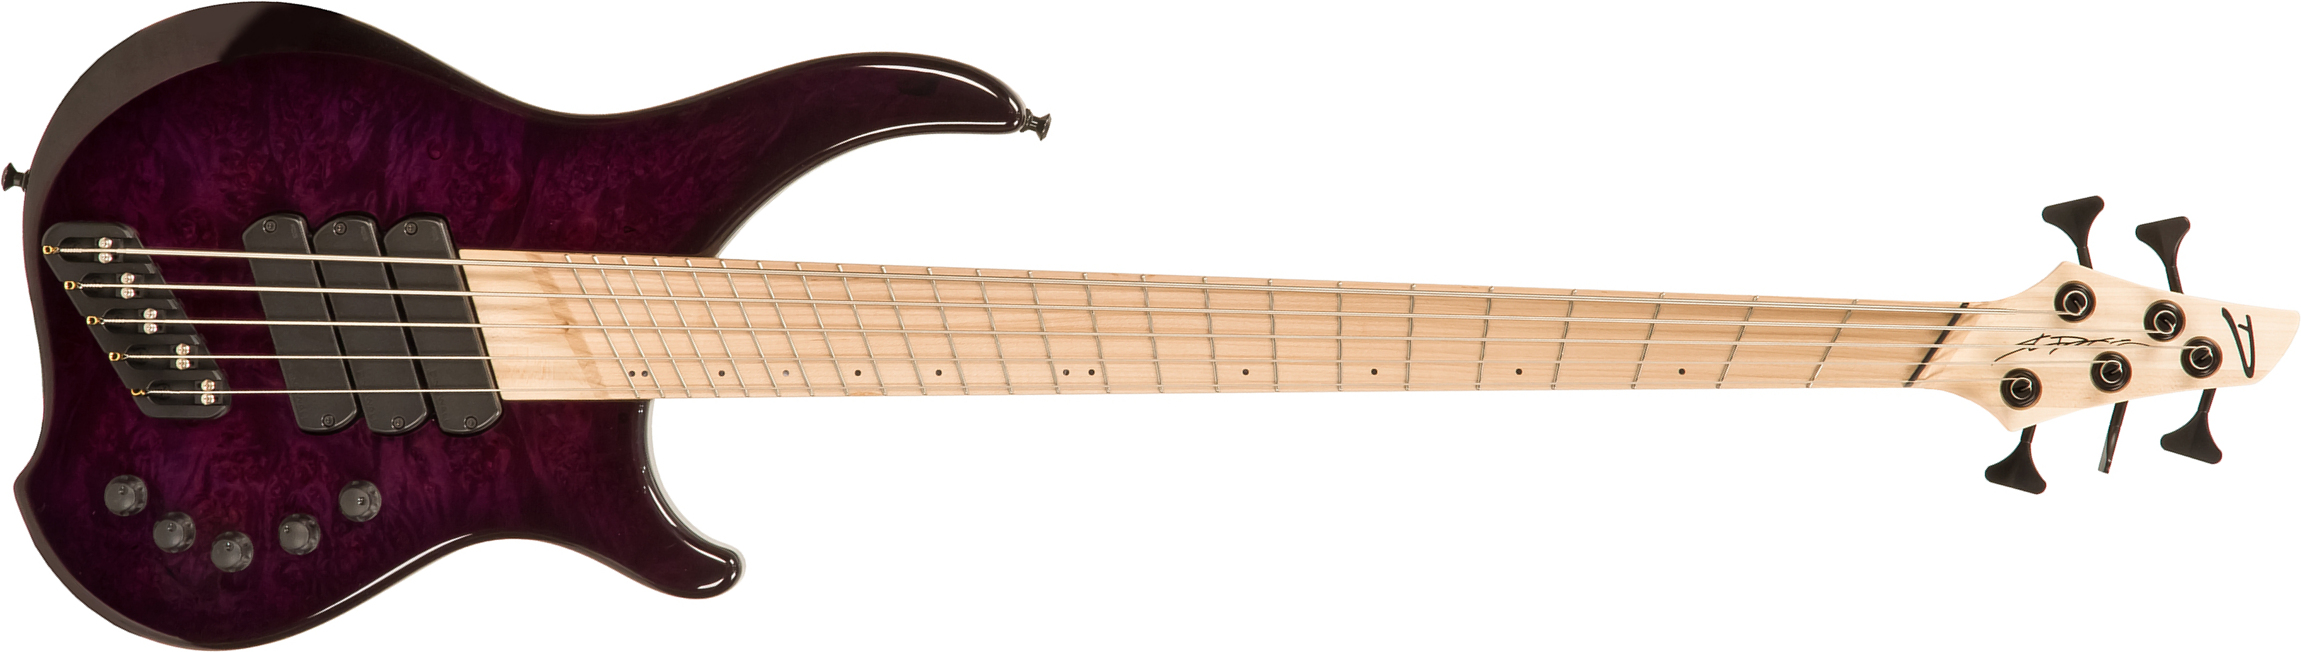 Dingwall Afterburner I 5 3-pickups Mn - Faded Purple Burst - Solid body electric bass - Main picture